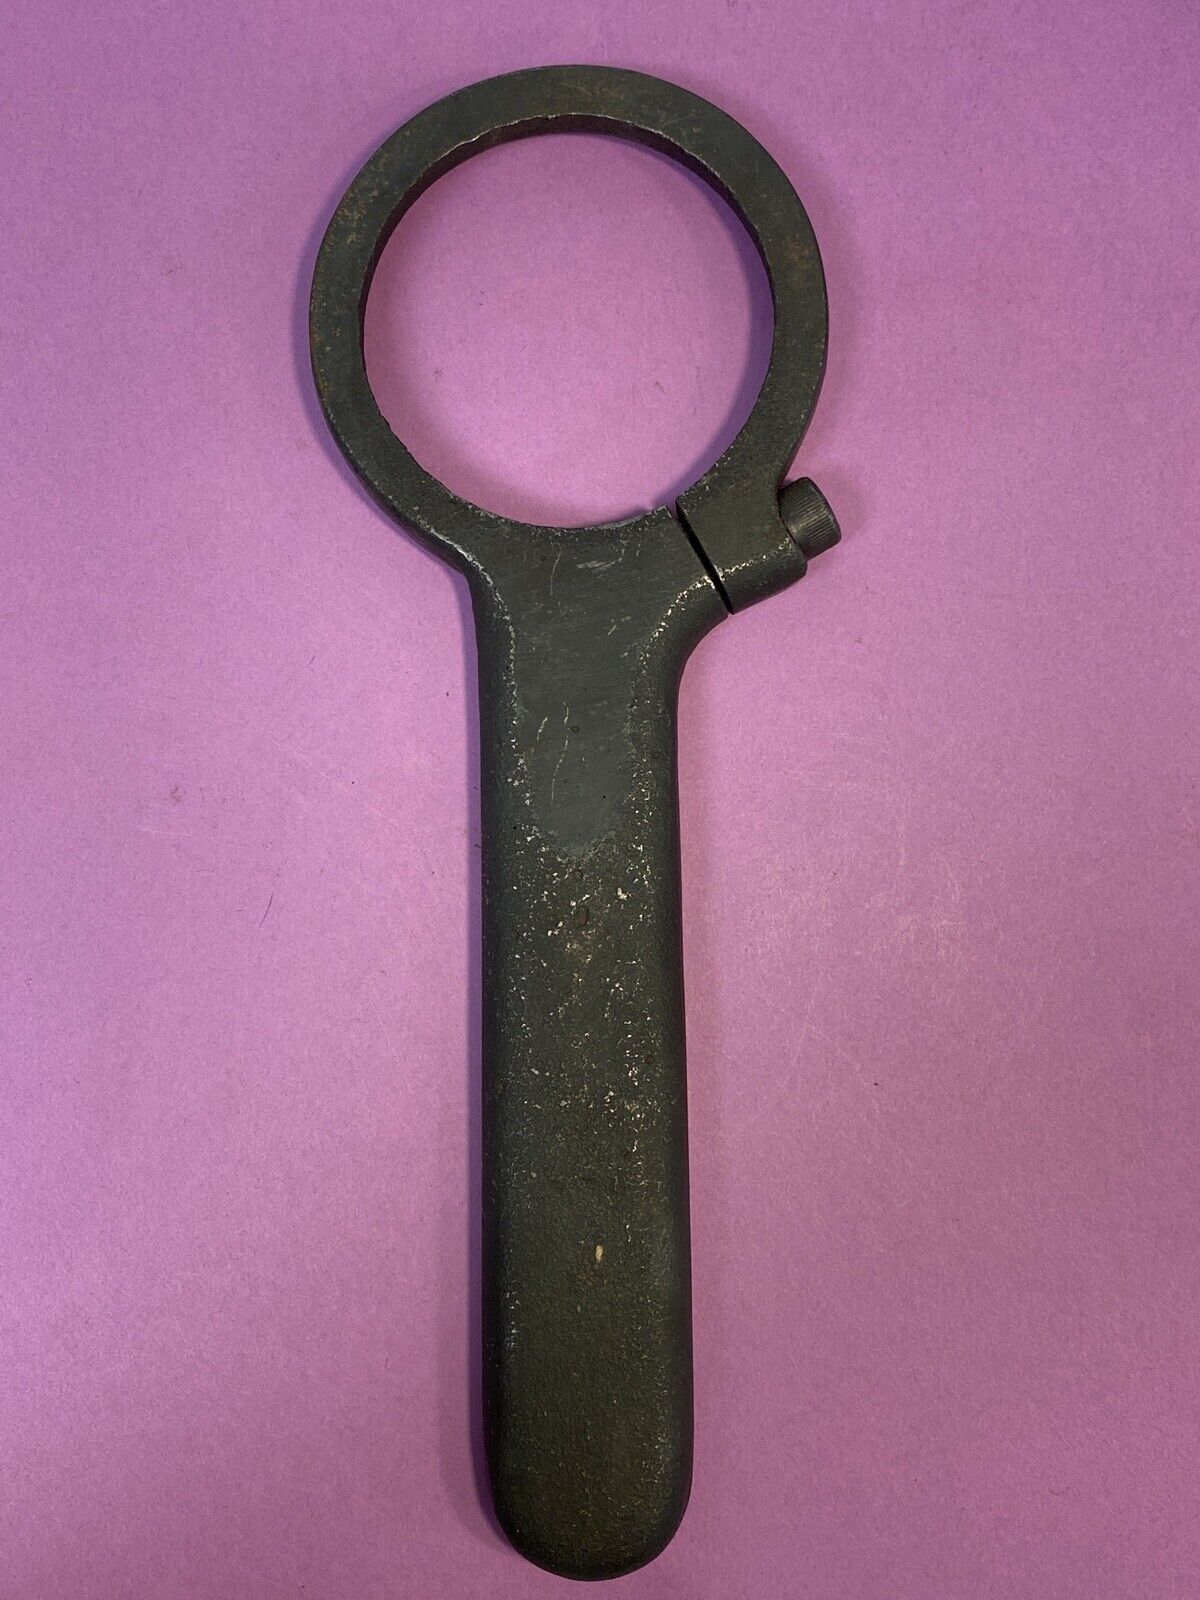 USED 21388AV BEARING HOUSING PULLER UNION Fixed price for sale WRENCH SPECIAL FOR Popular standard